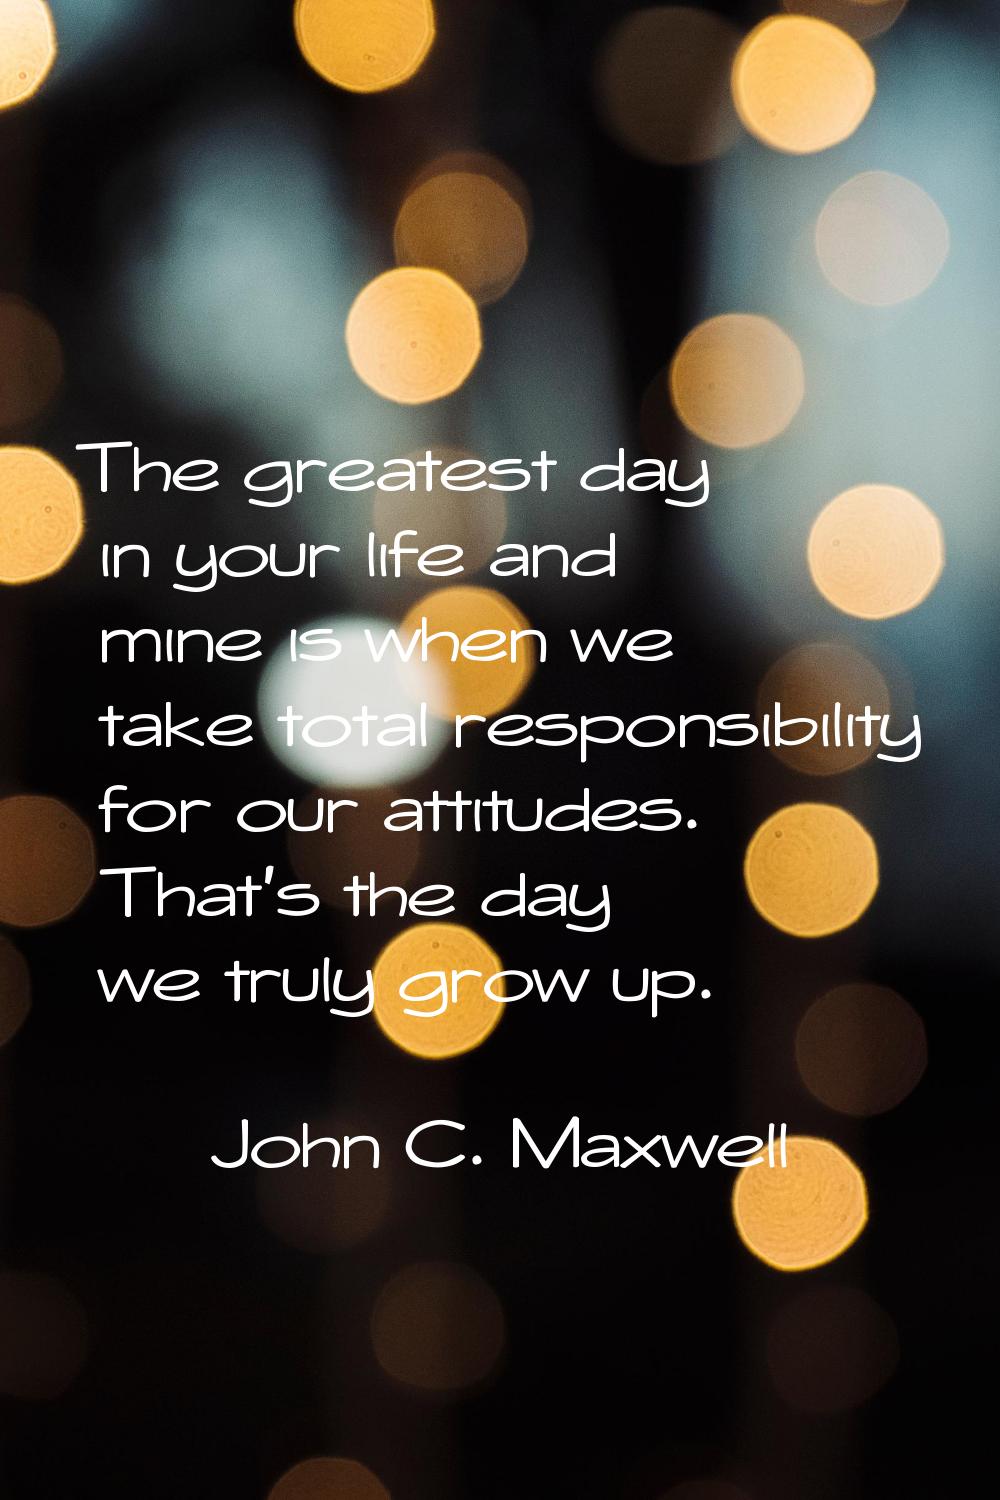 The greatest day in your life and mine is when we take total responsibility for our attitudes. That